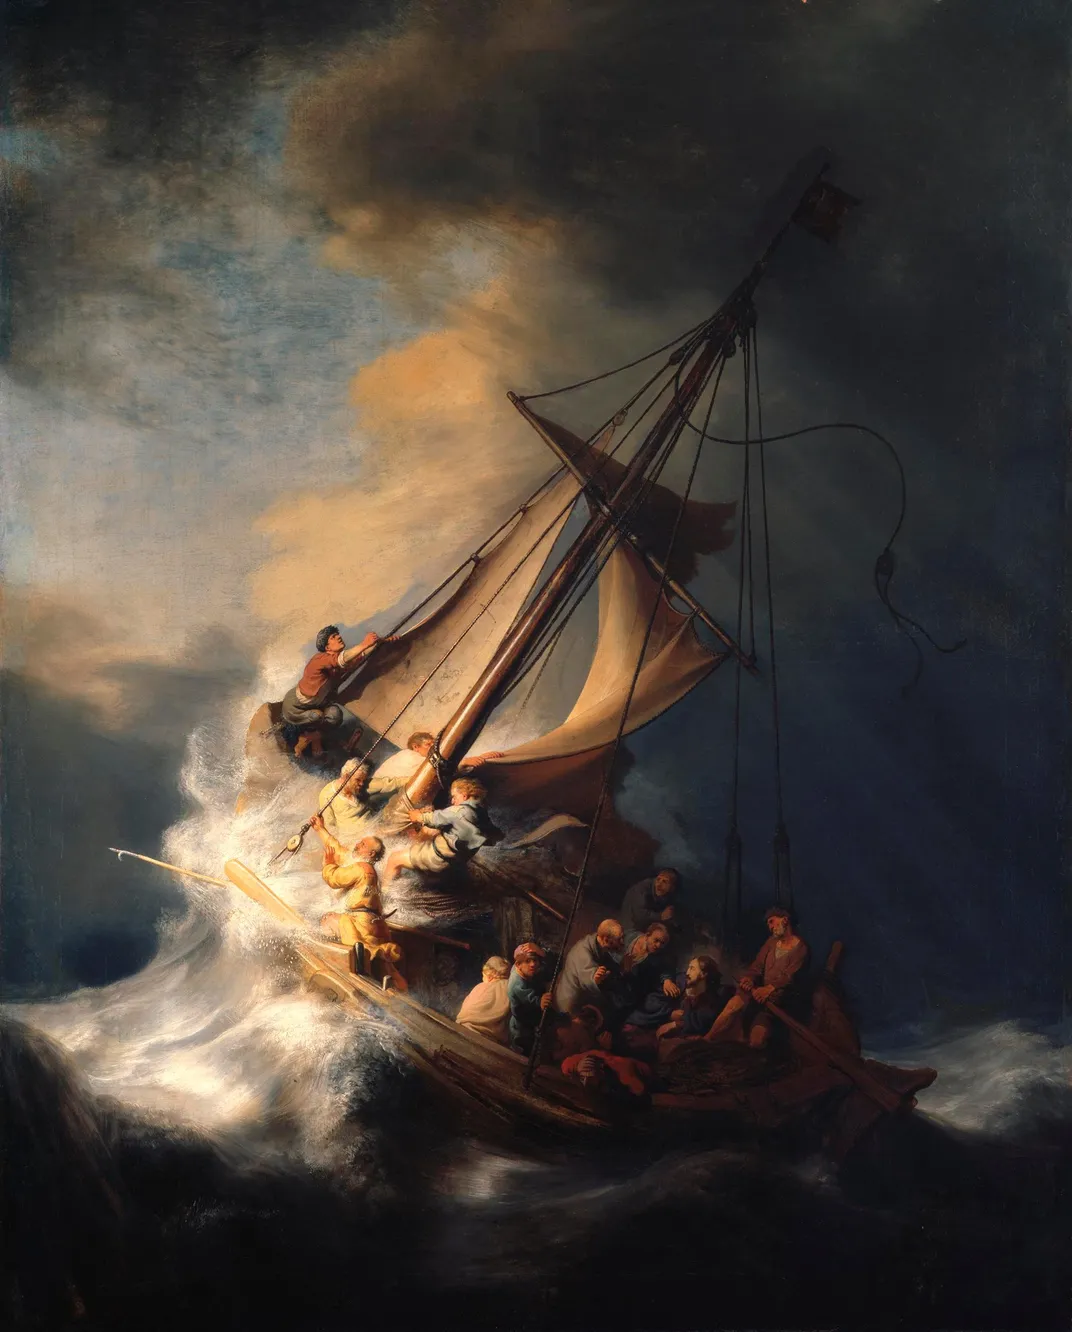 A dramatic view of men, Jesus' disciples, on a ship in tossing, rough waters, with bright light emerging from the left of the composition